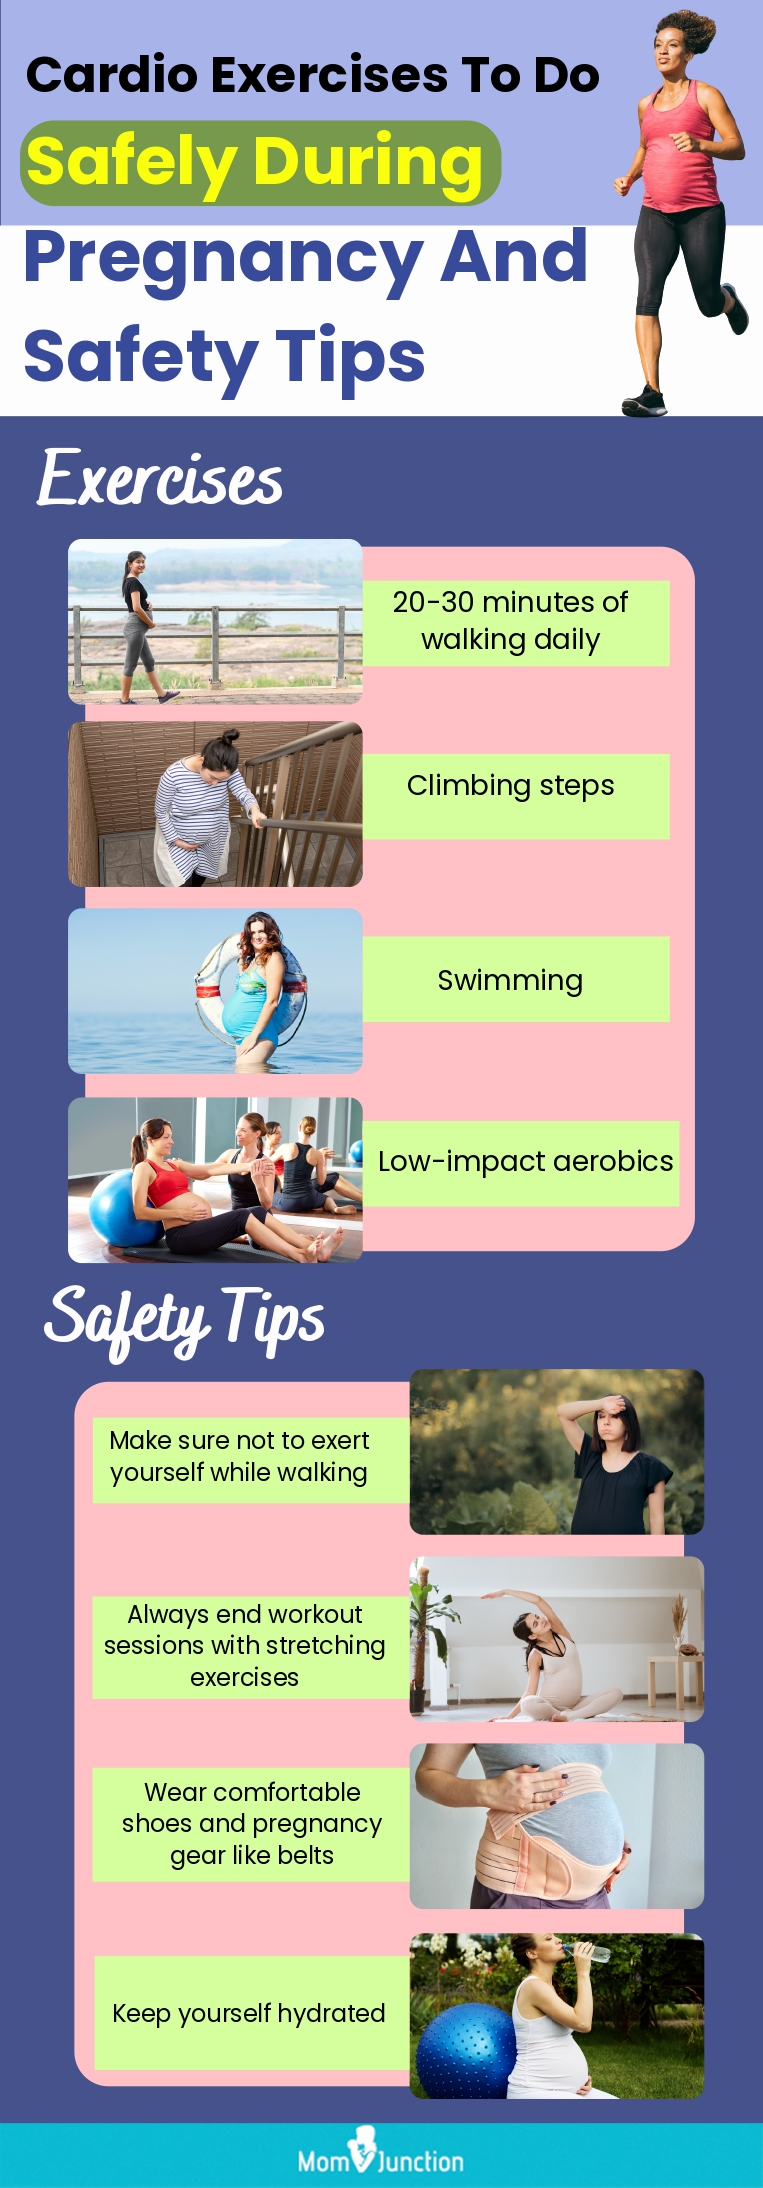 Safety Advice and Tips for Exercise During Pregnancy